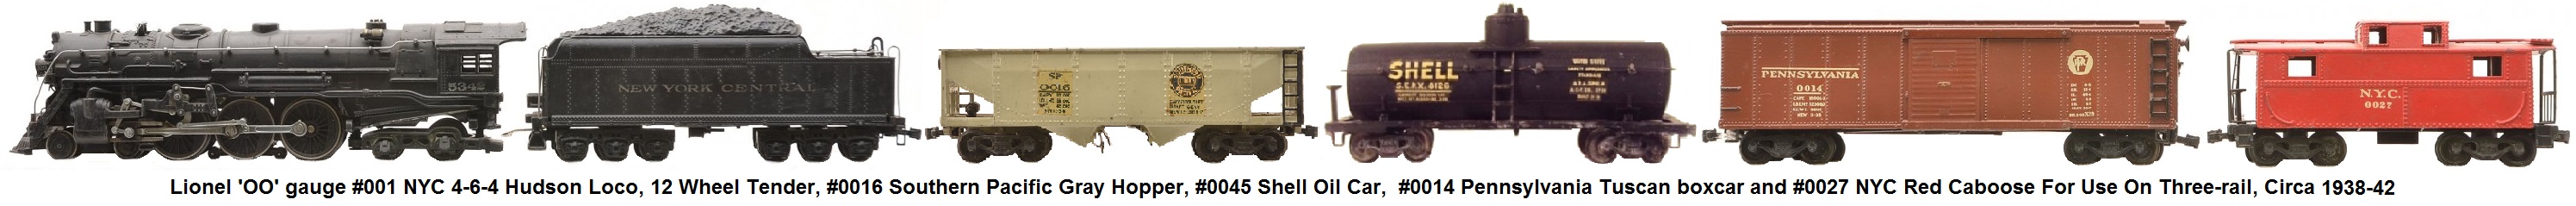 Lionel prewar 'OO' gauge #001 NYC Hudson black steam loco with #001W NYC tender, #0016 Southern Pacific gray hopper, #0045 Shell Oil Car, #0014 Pennsylvania Tuscan boxcar and #0027 NYC red caboose for use on three-rail track, circa 1938-1942